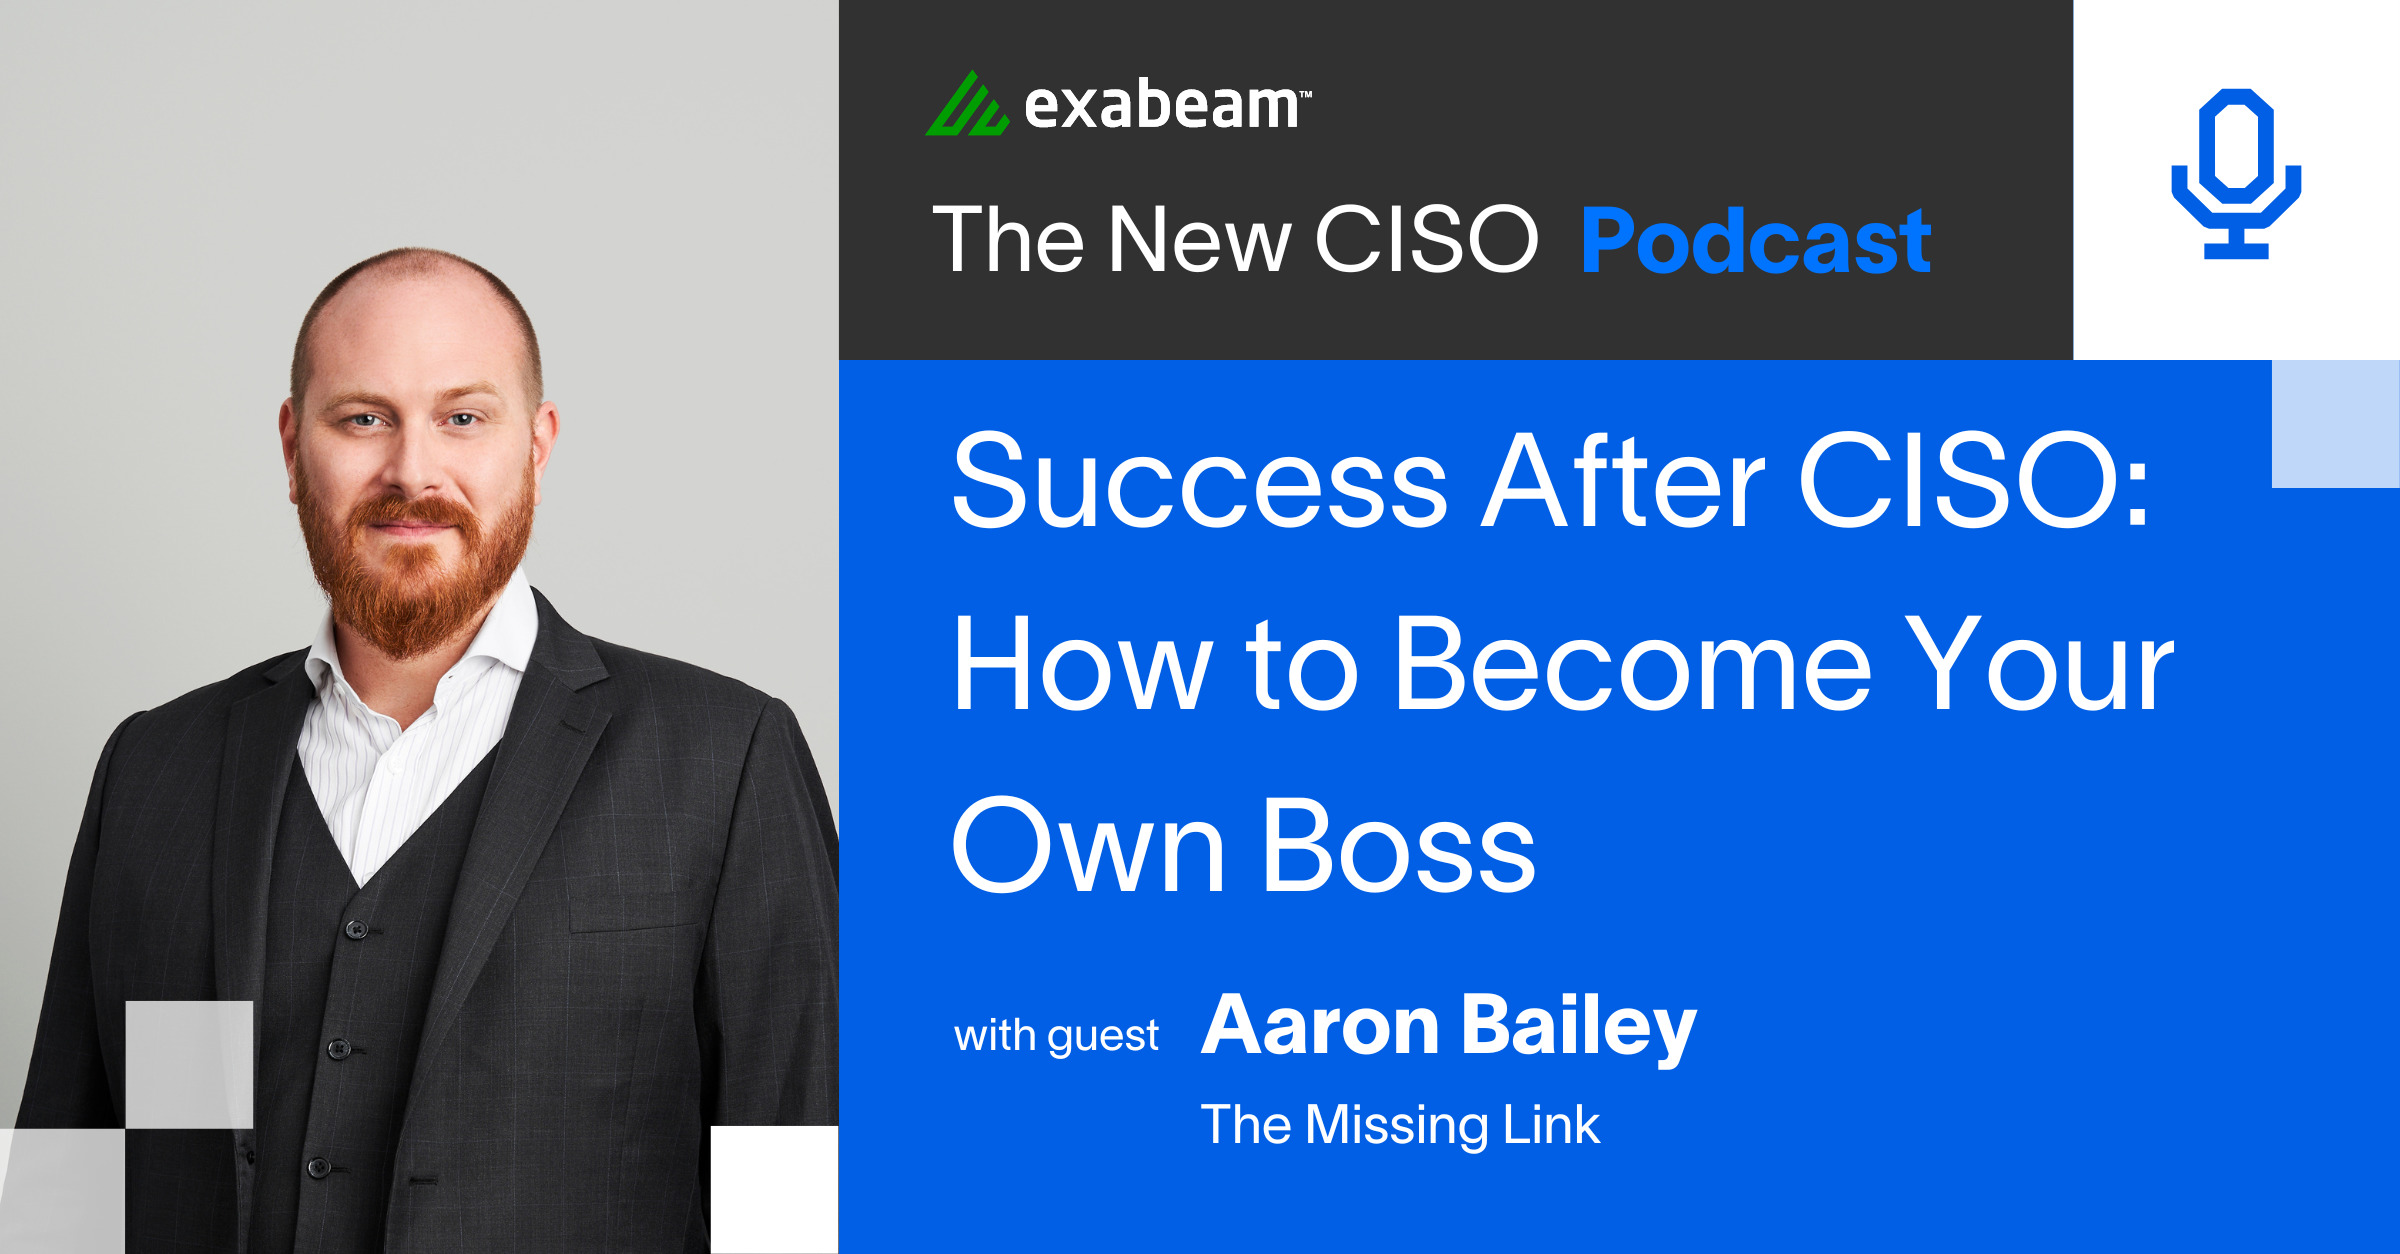 The New CISO Podcast Episode 74: "Success After CISO - How to Become Your Own Boss” with guest Aaron Bailey from The Missing Link